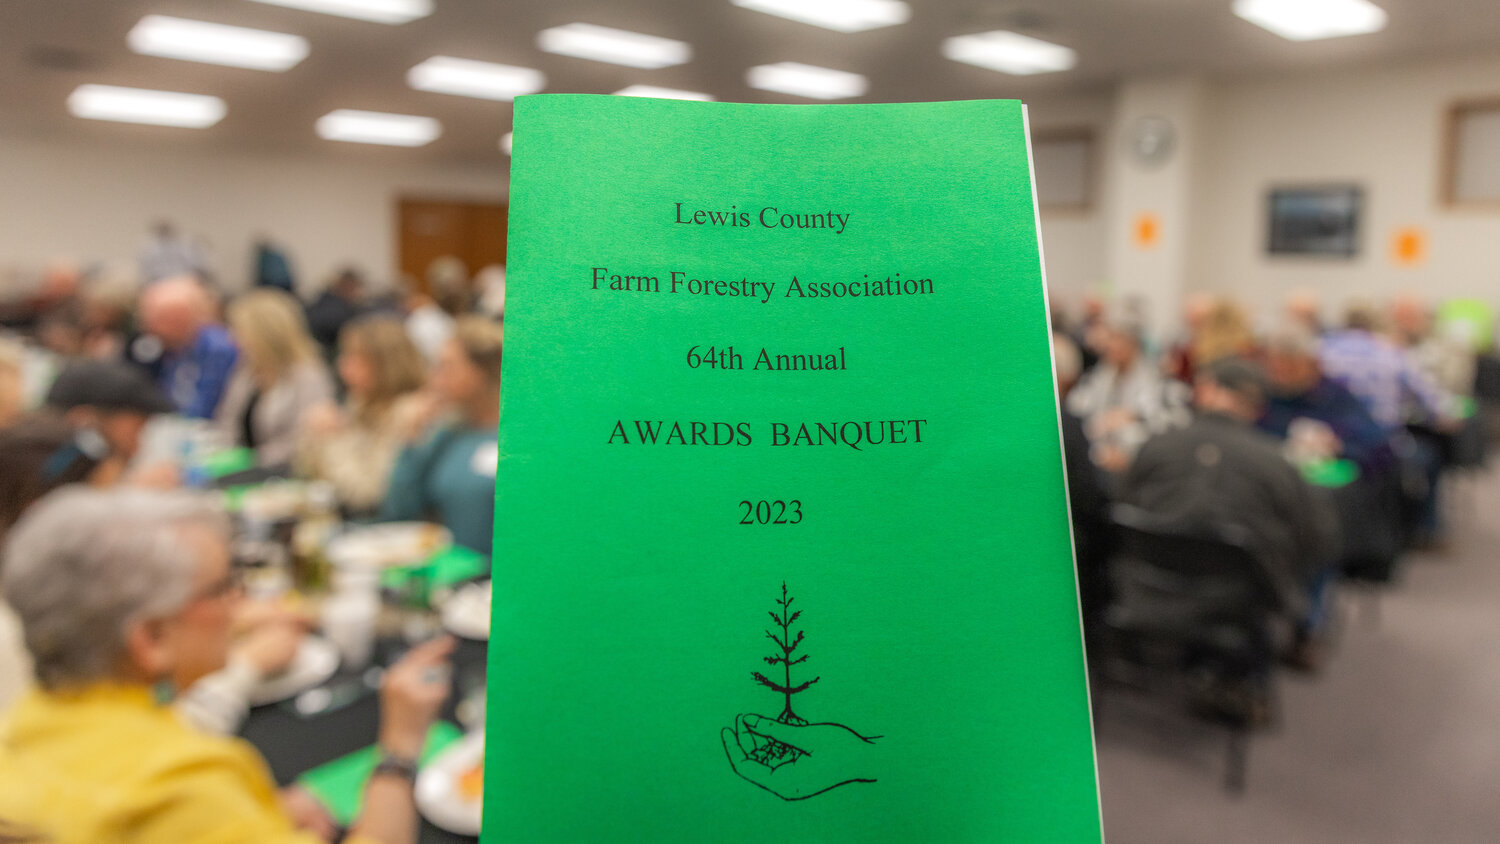 Attendees gather for the Lewis County Farm Forestry Association awards banquet in Chehalis on Tuesday, Nov. 14.